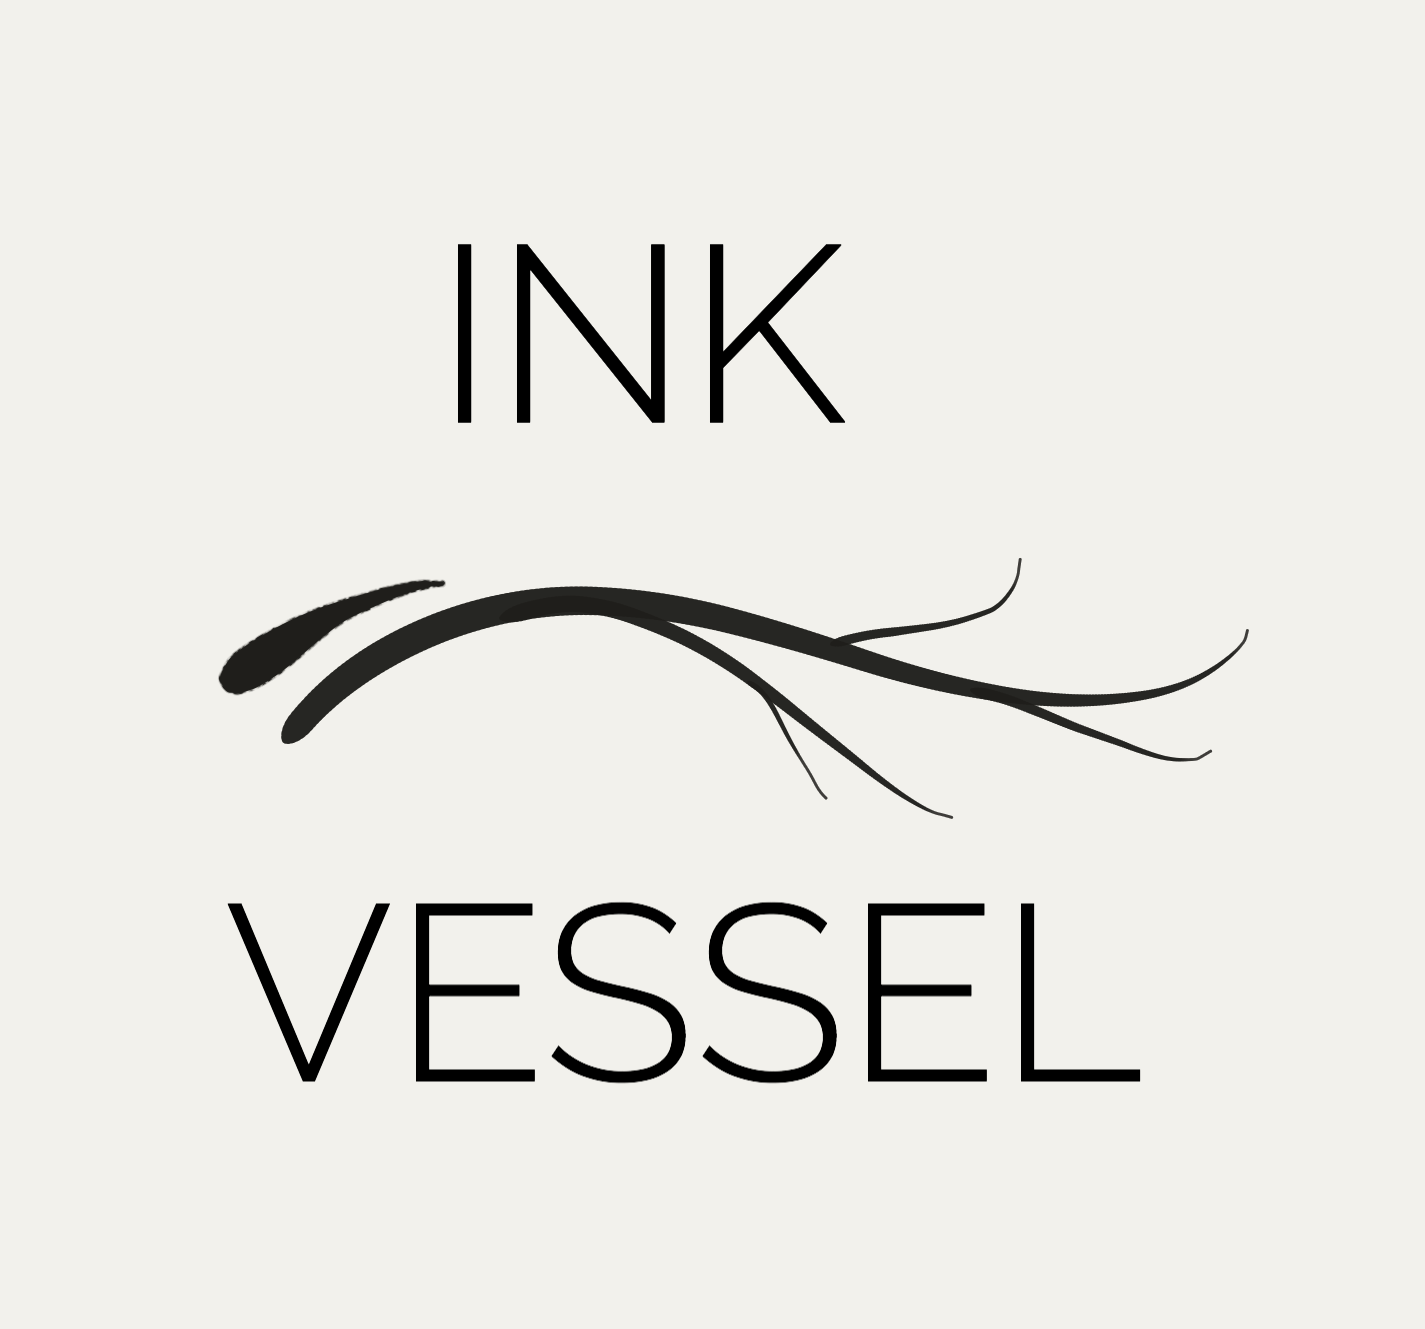 The Ink Vessel